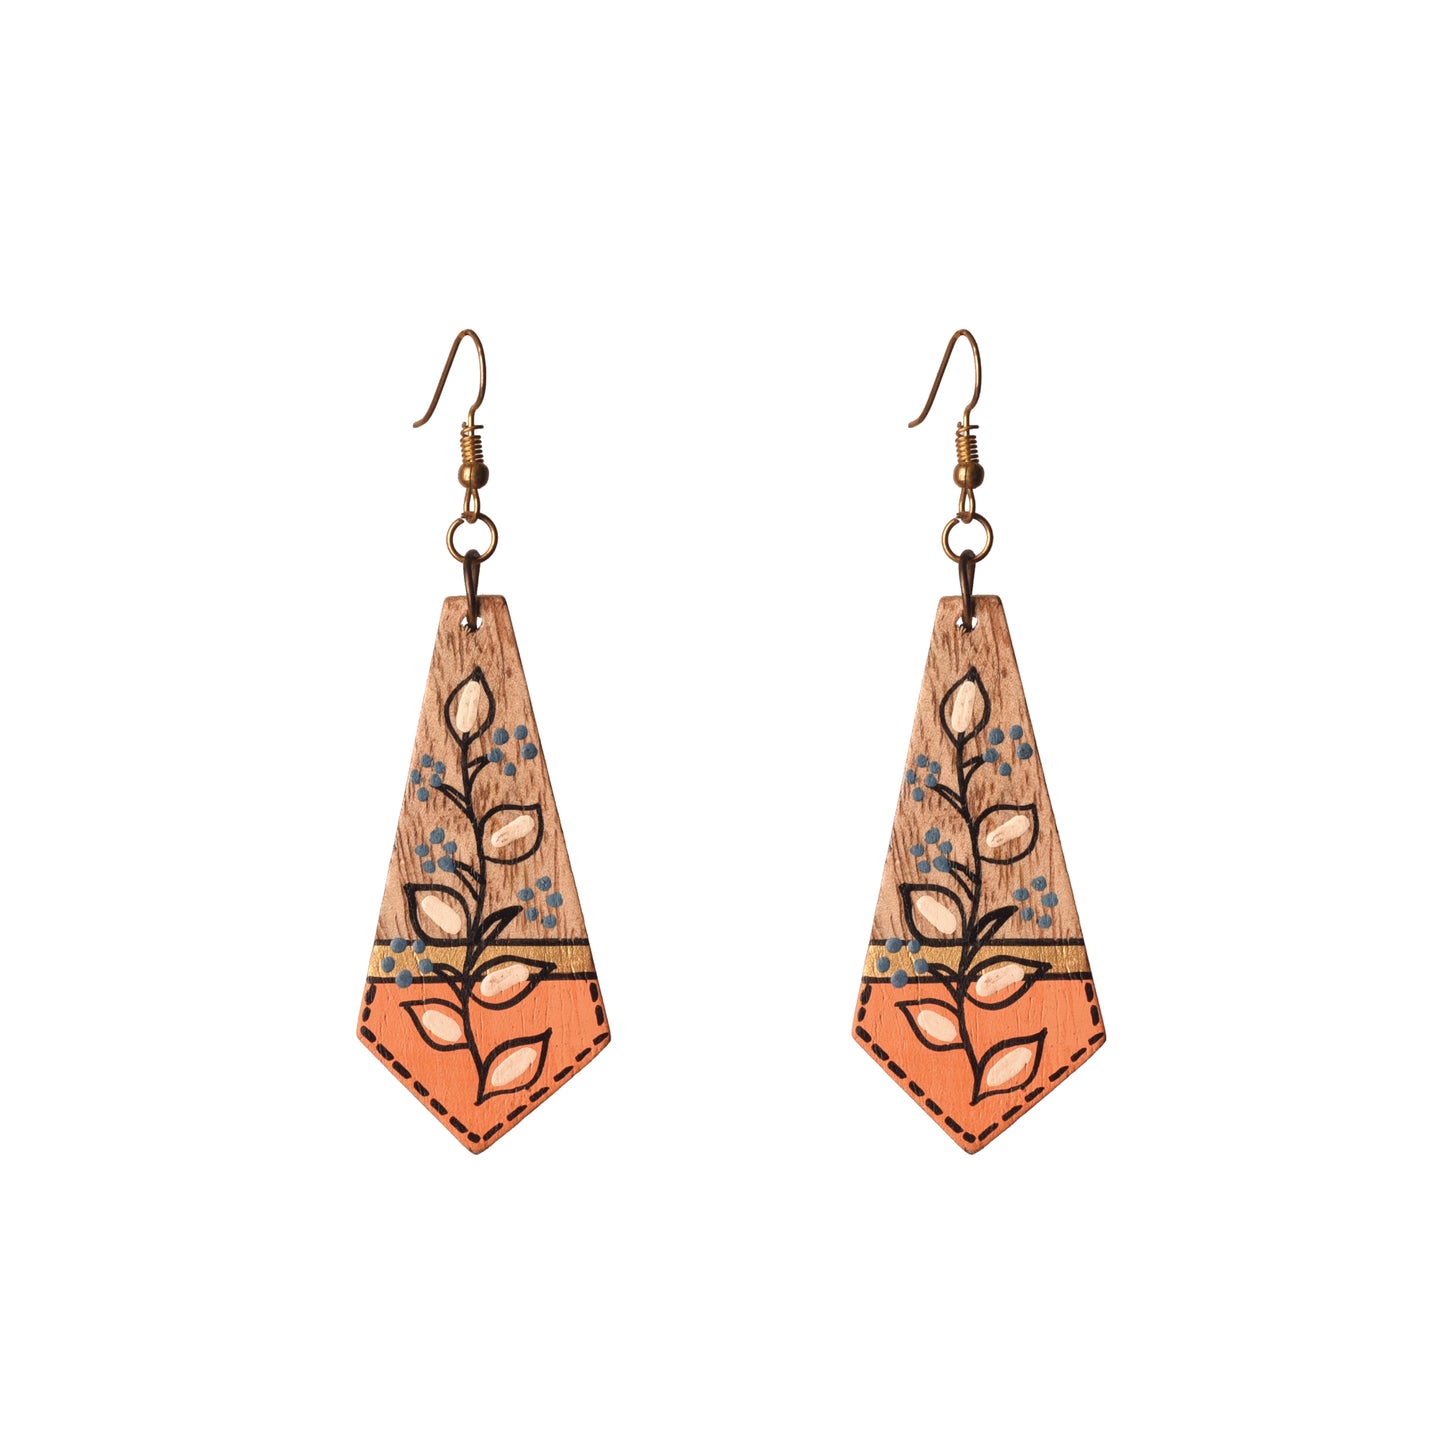 The Floral Arrows Handcrafted Tribal Wooden Earrings